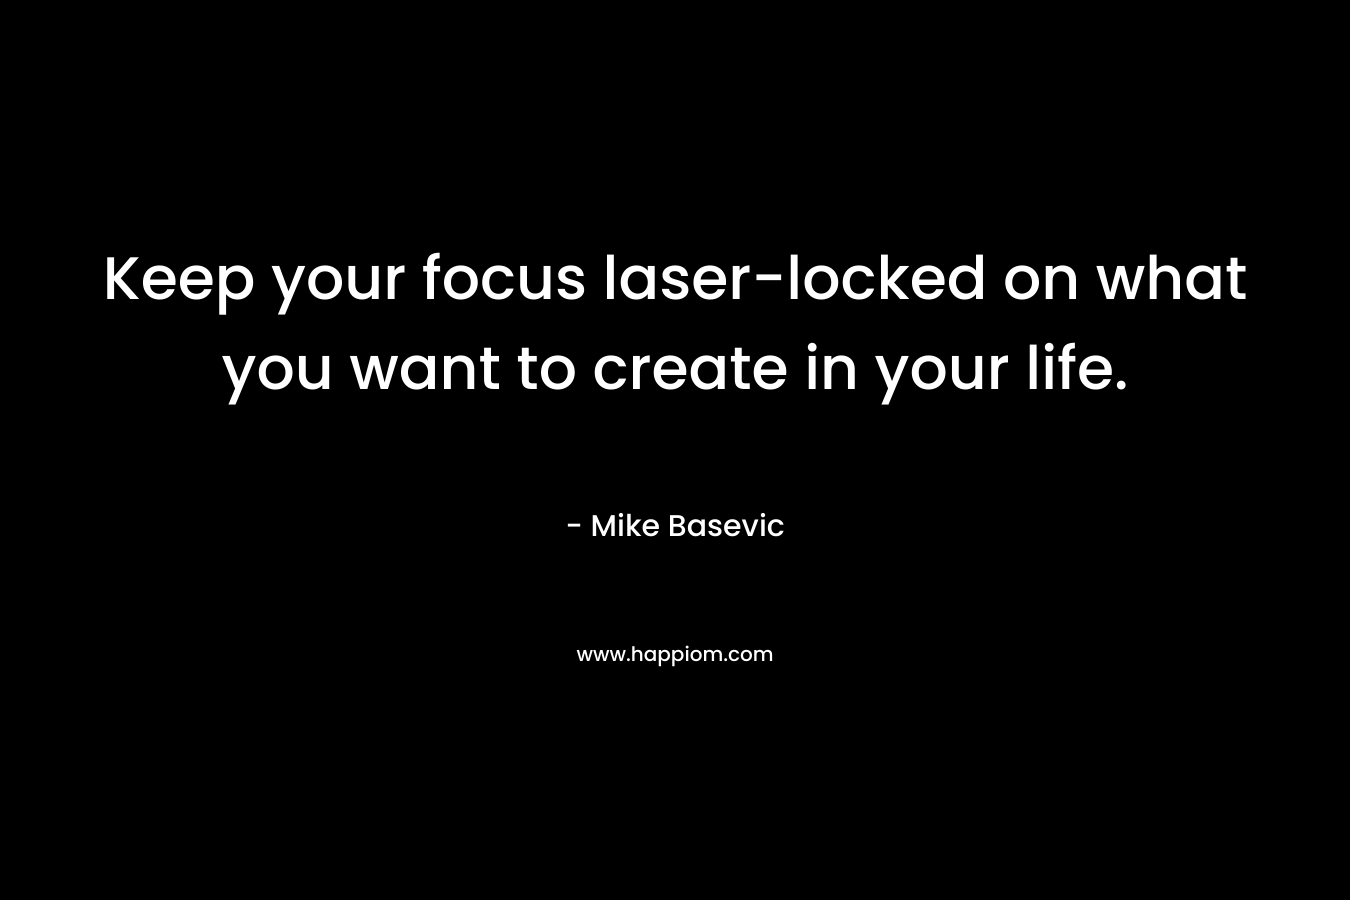 Keep your focus laser-locked on what you want to create in your life. – Mike Basevic